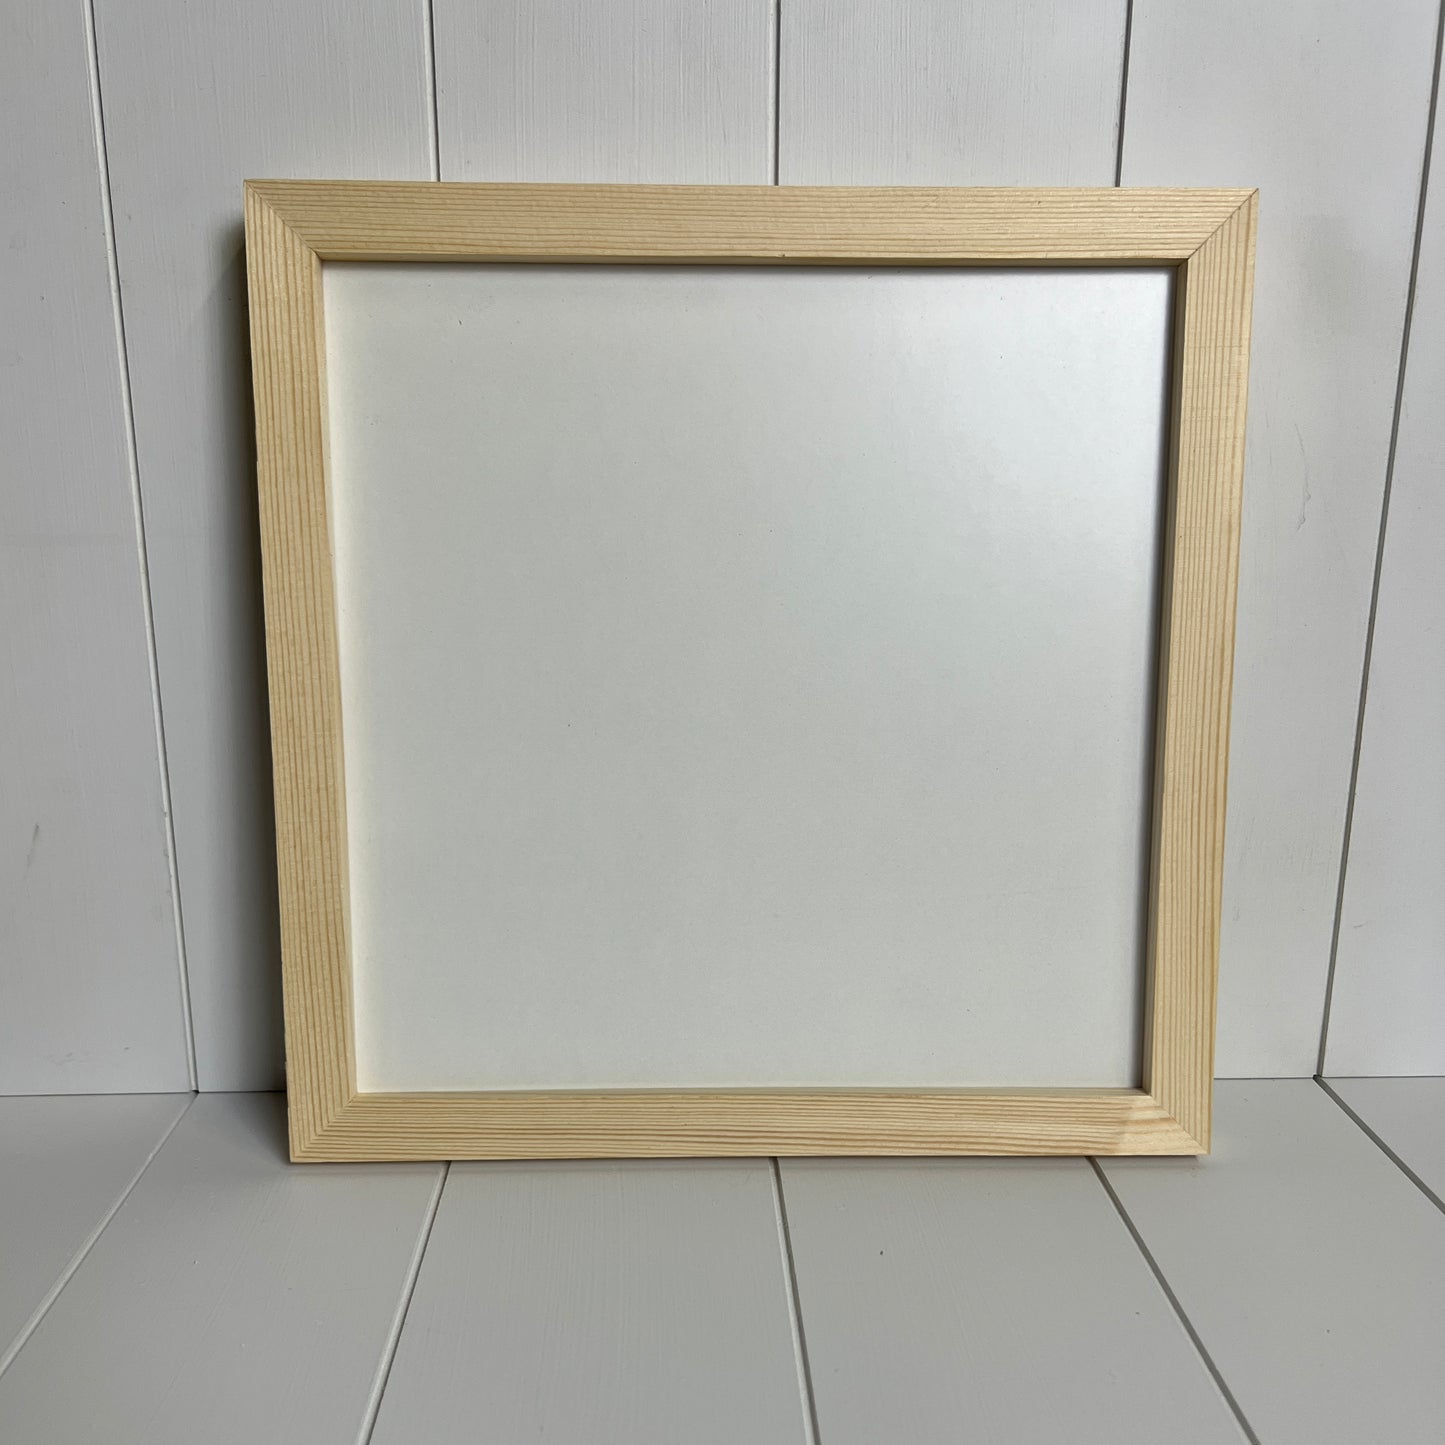 WHOLESALE: 8x8 inch Unstained Wood Frames with Removable Backs